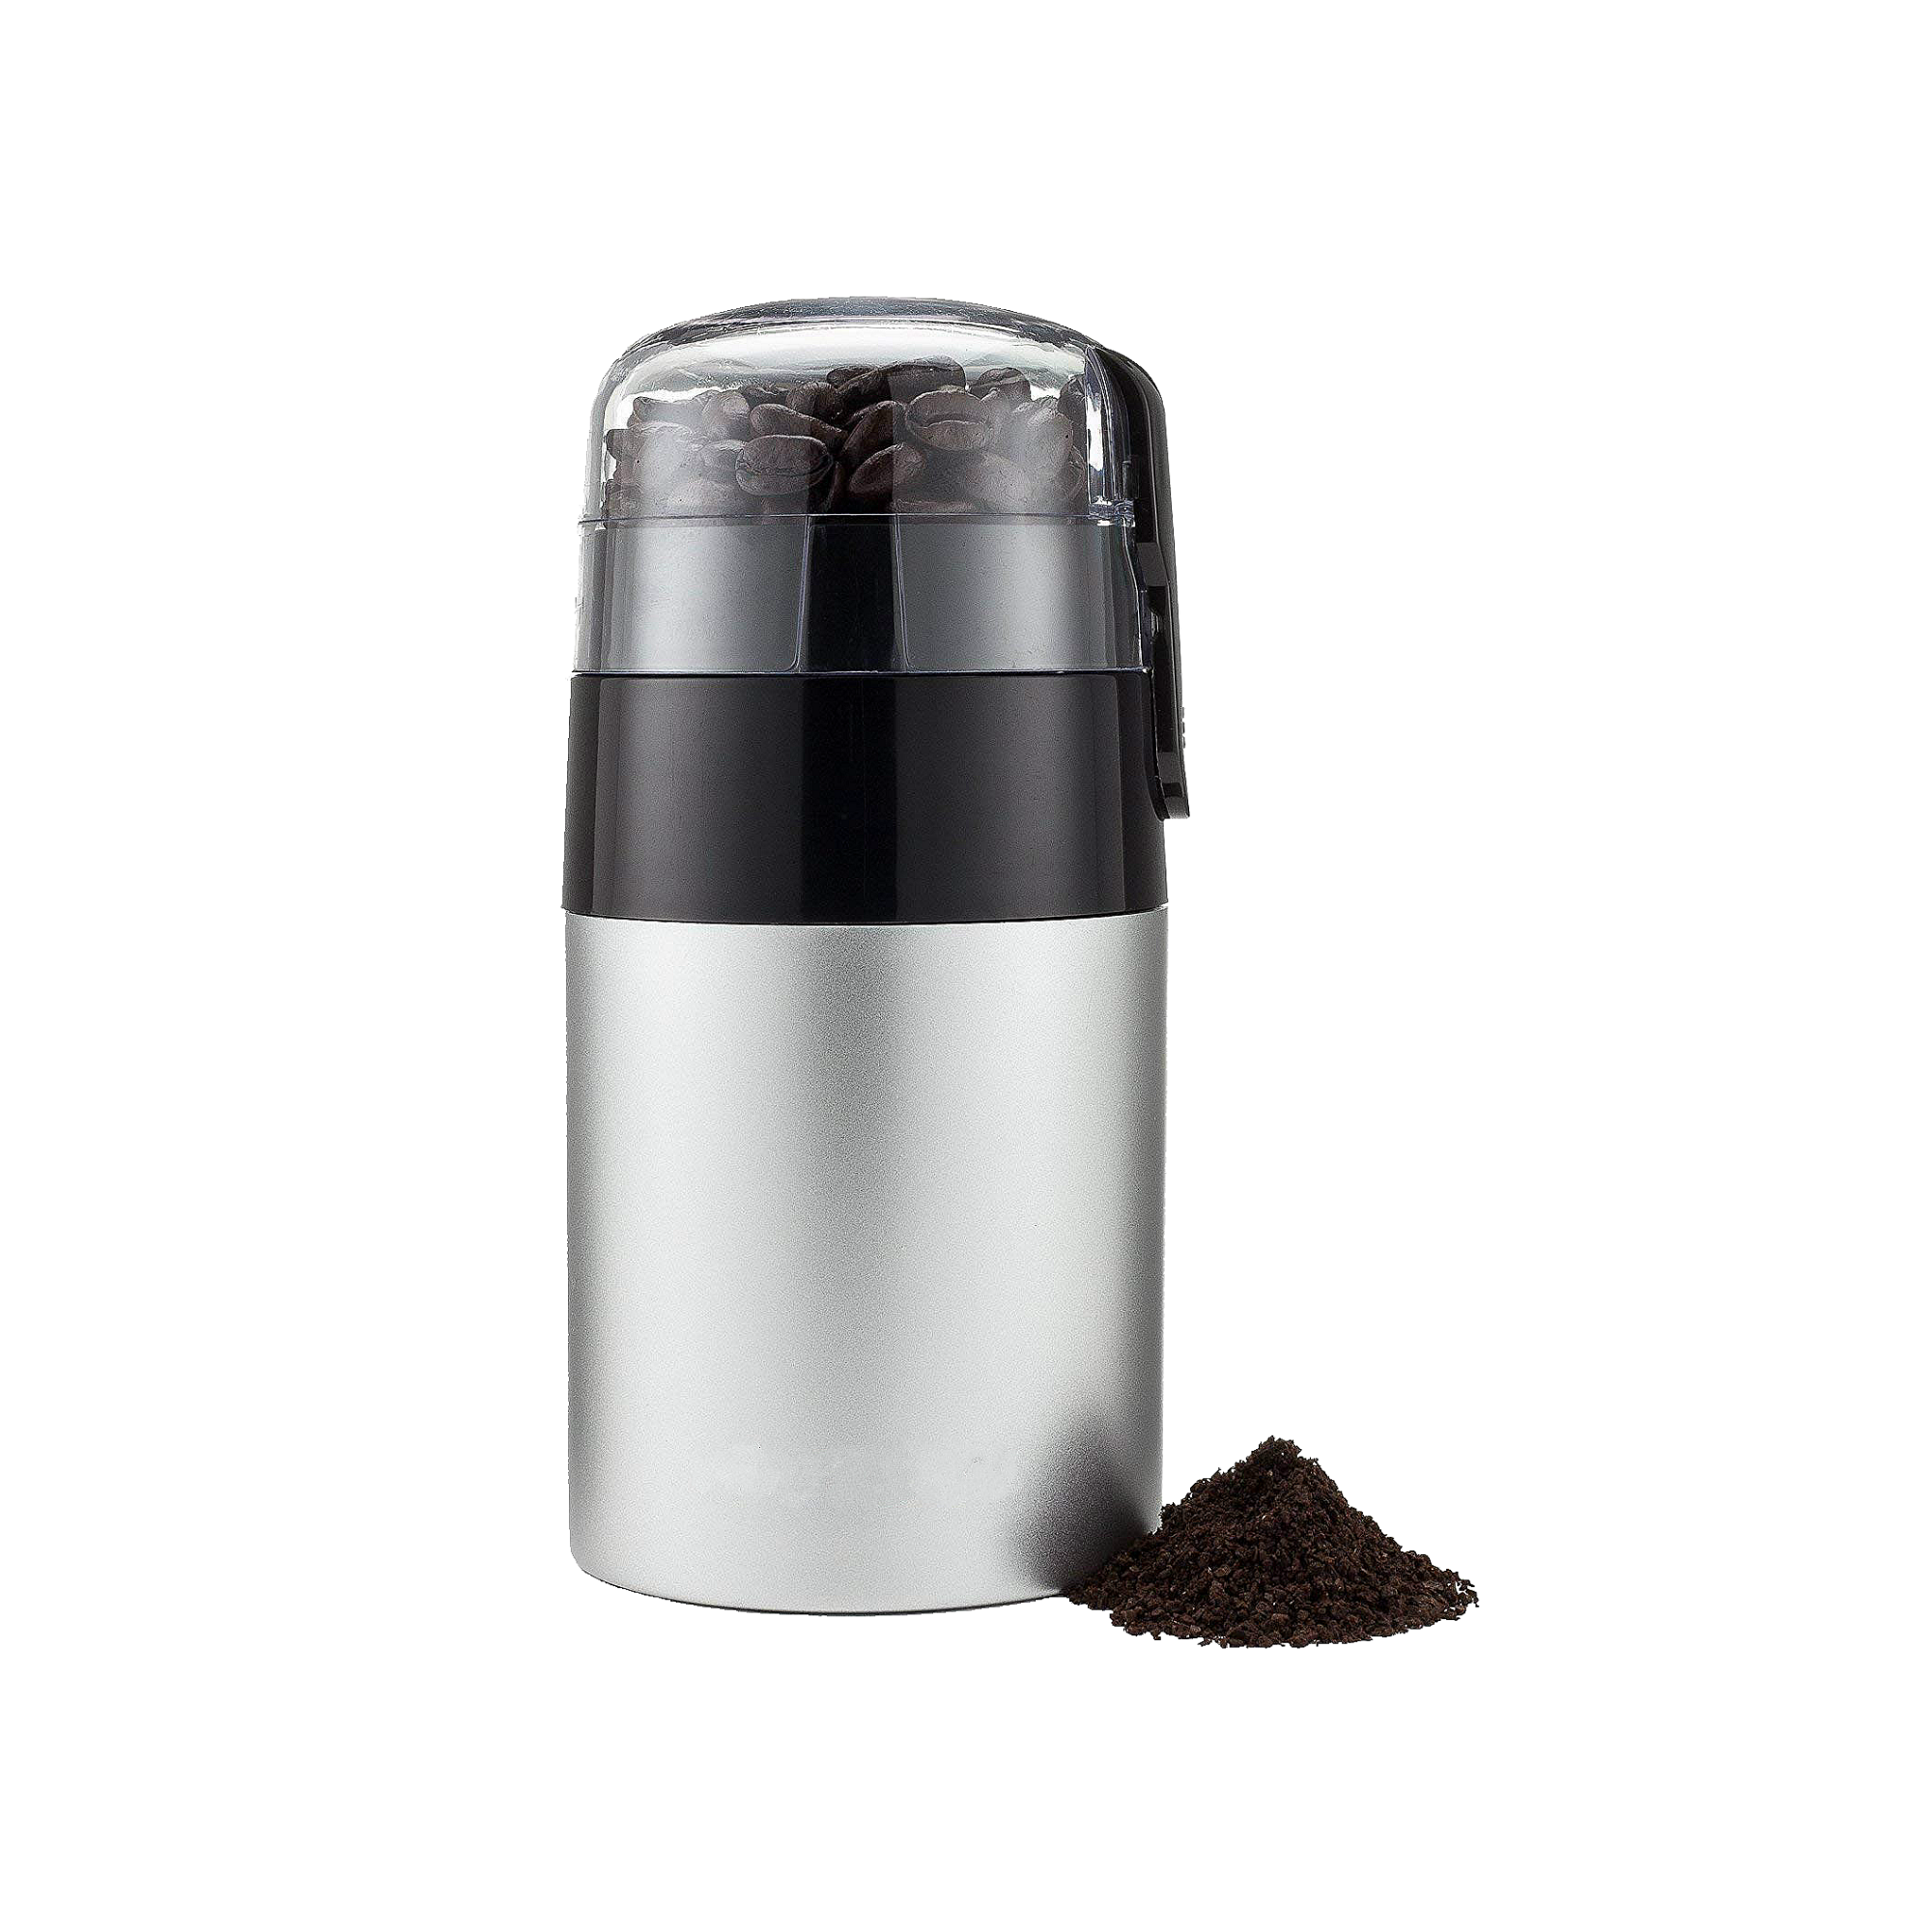 One-Touch Electric Coffee Grinder. Grinds Coffee Beans, Spices, Nuts and Grains - With cord storage function